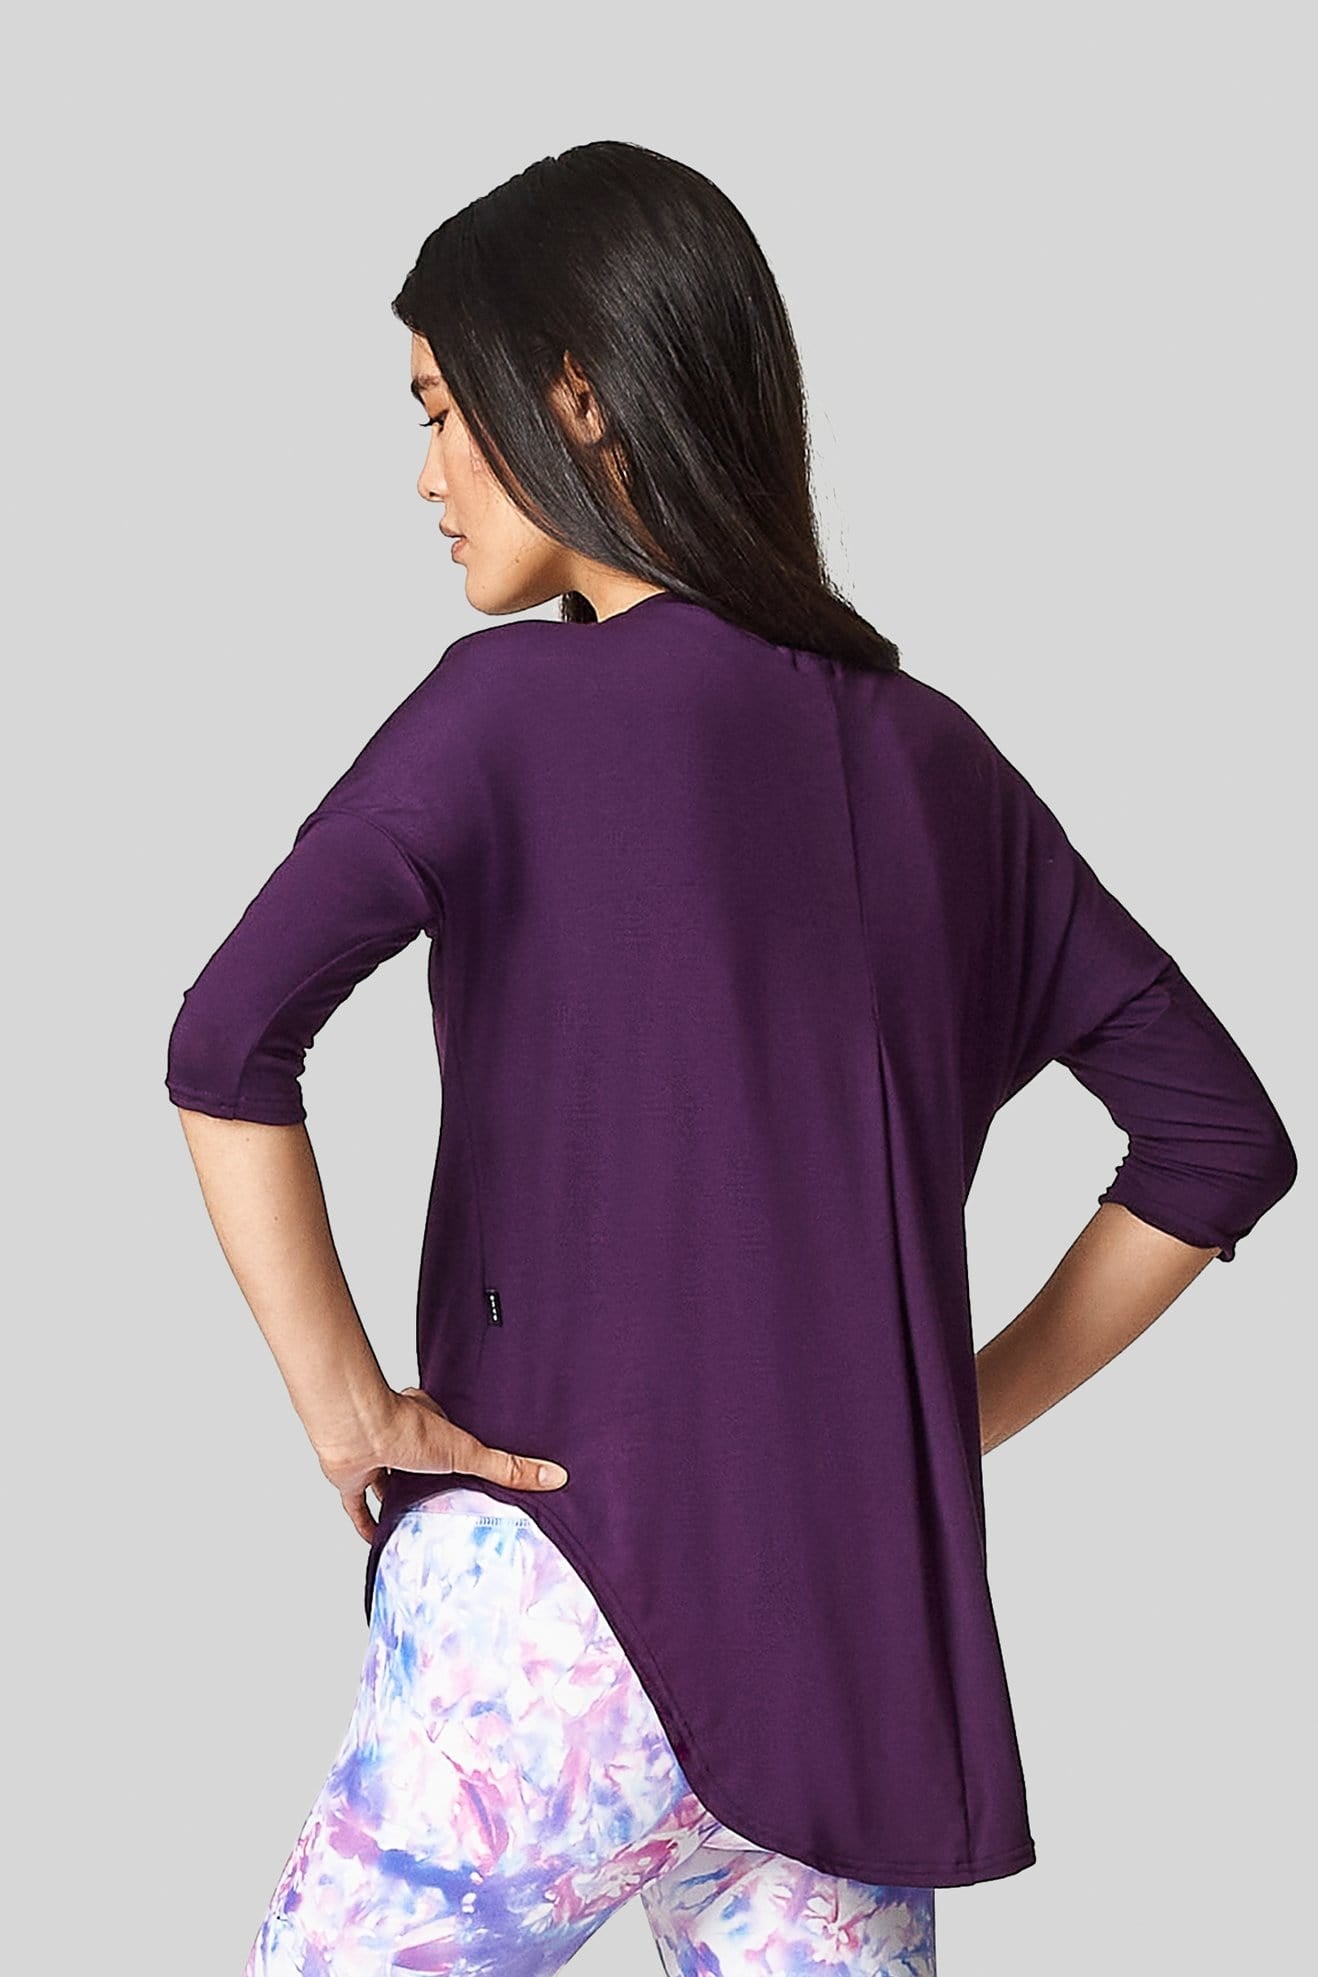 A black haired female is wearing a purple tee-shirt with a scooped hem that is long in the back to cover her bum.